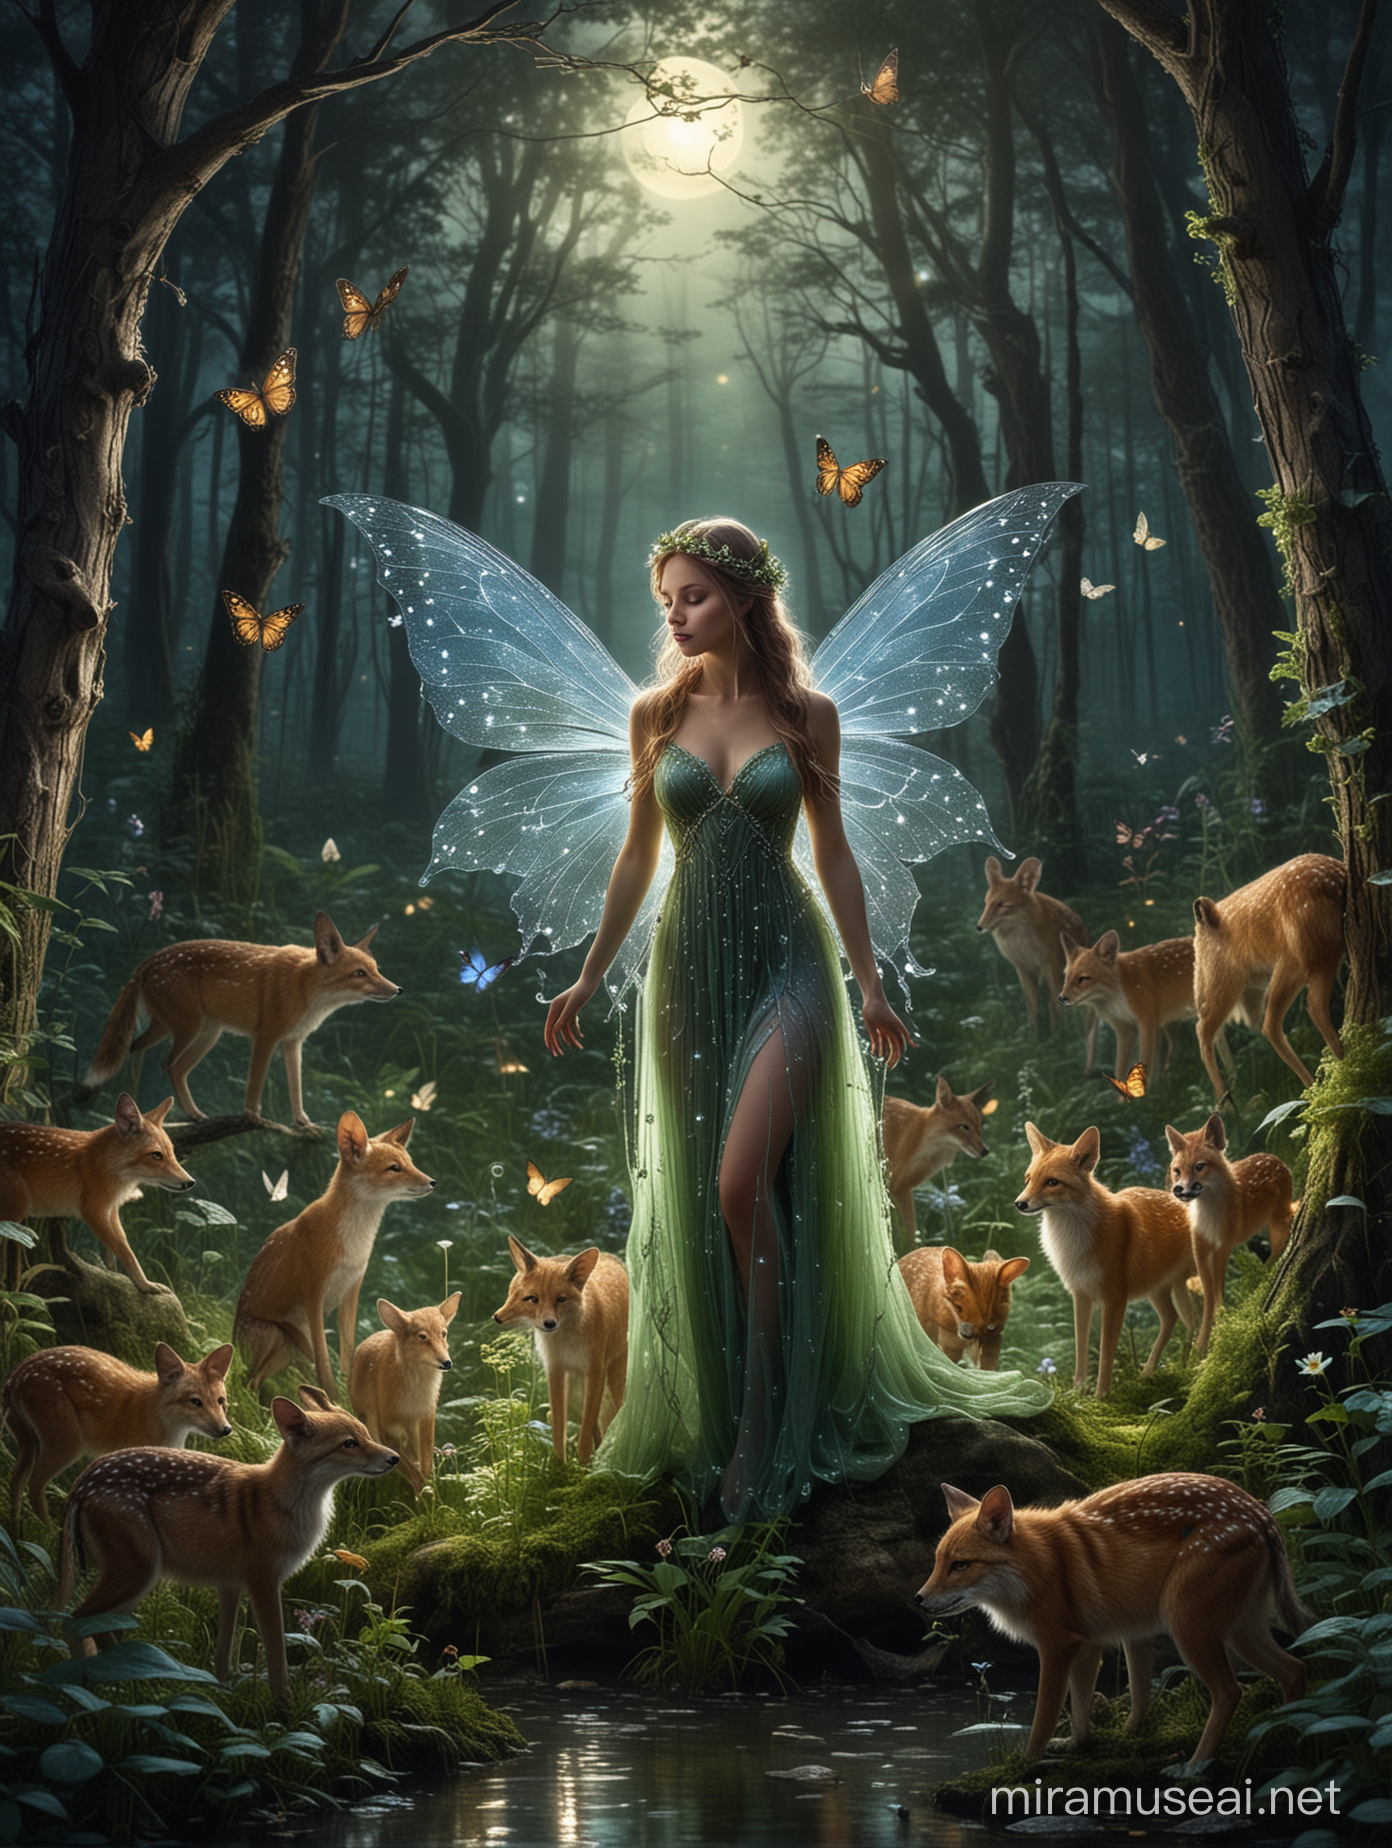 Enchanting Fairy and Forest Animals under Moonlight